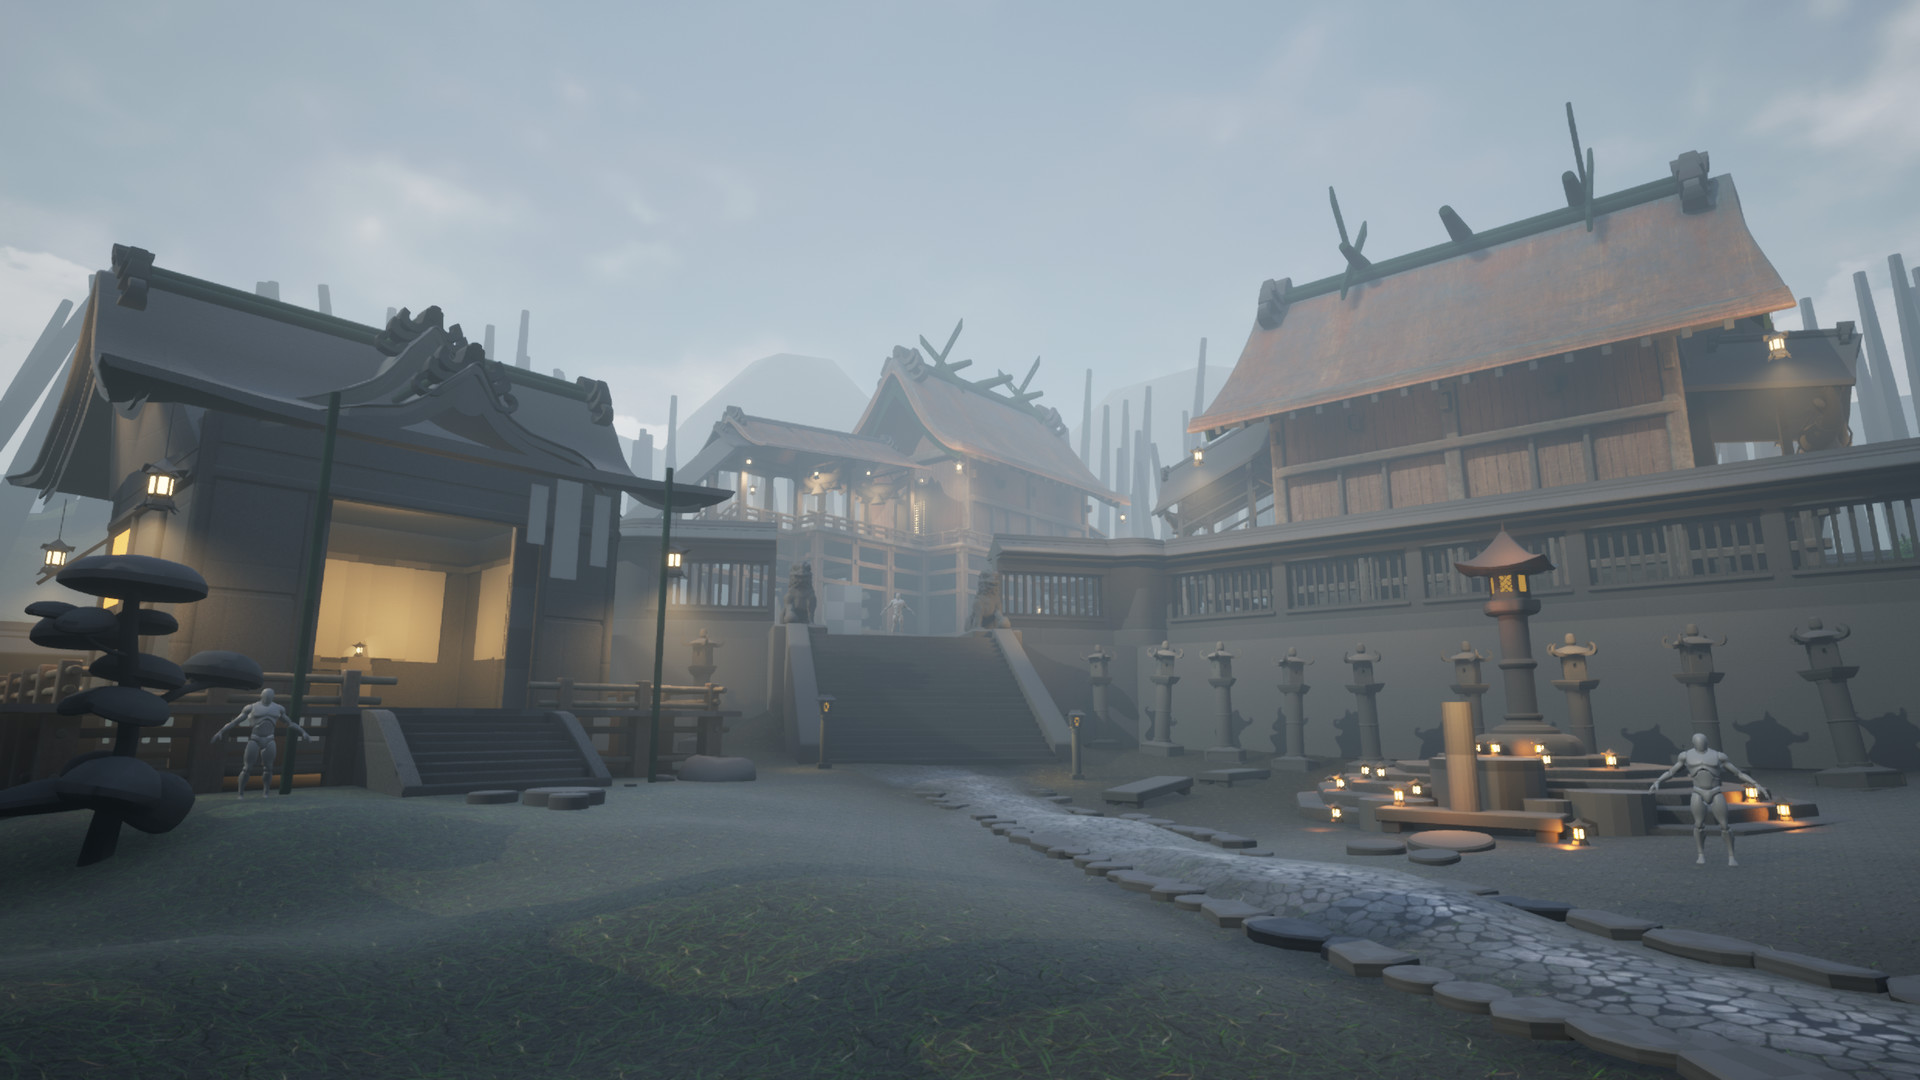 Unreal 4 screenshot showing the layout of the 3D scene. Everything is now moved around and reshuffled. The calligraphers hut is now on a level in Z lower than before. It sits to the right of the steps that lead to the main buildings. On the left of these steps is the shrine with the large, stone lantern.